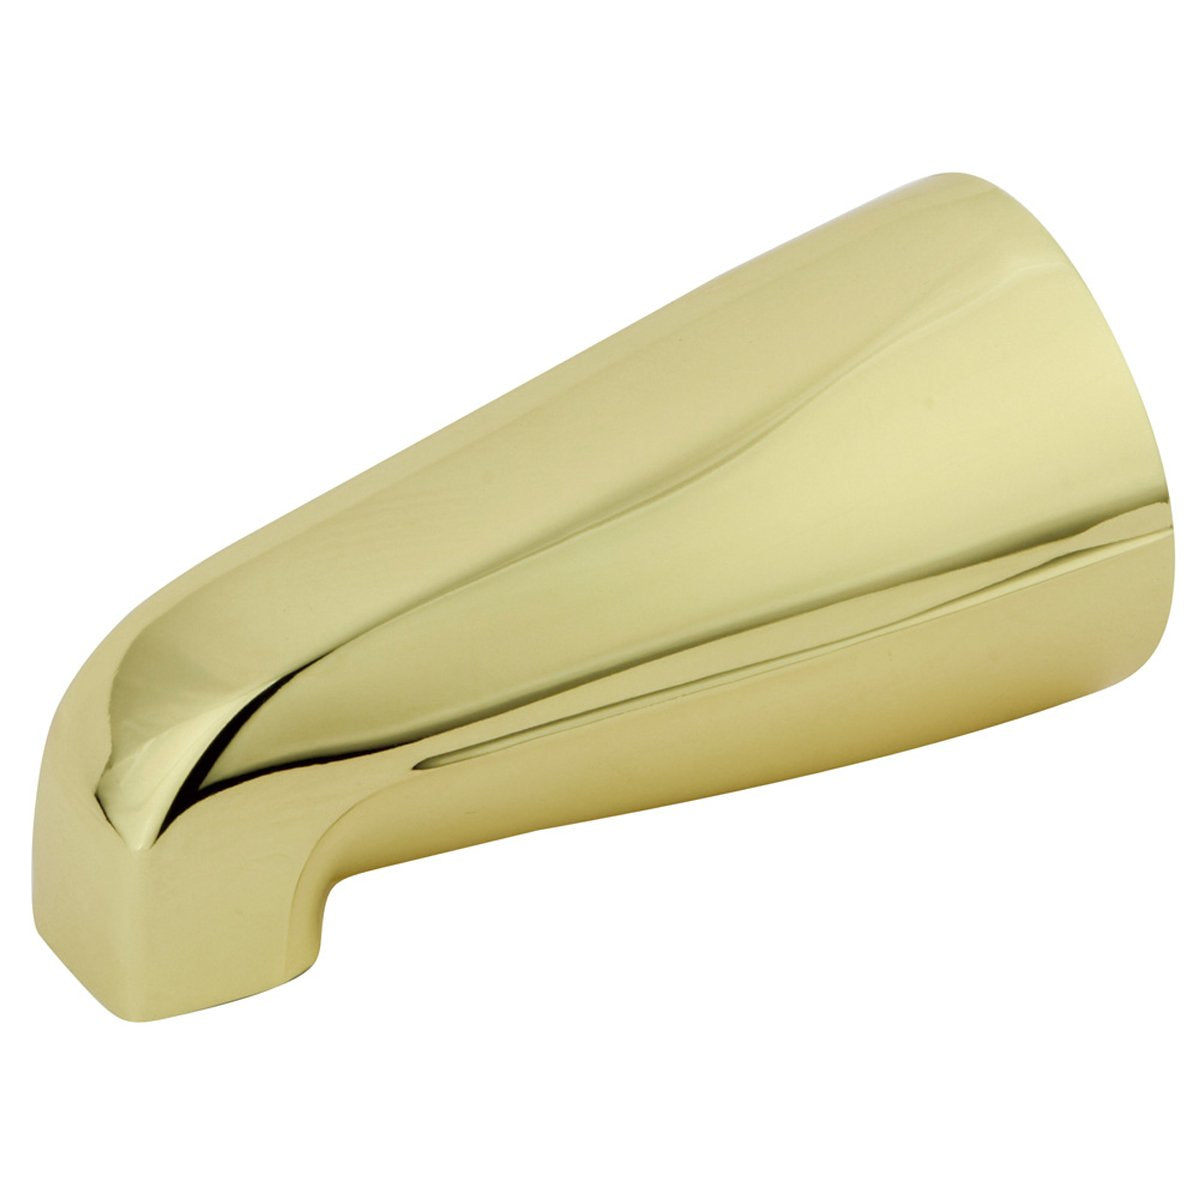 Kingston Brass Made to Match 5" Tub Spout-Bathroom Accessories-Free Shipping-Directsinks.